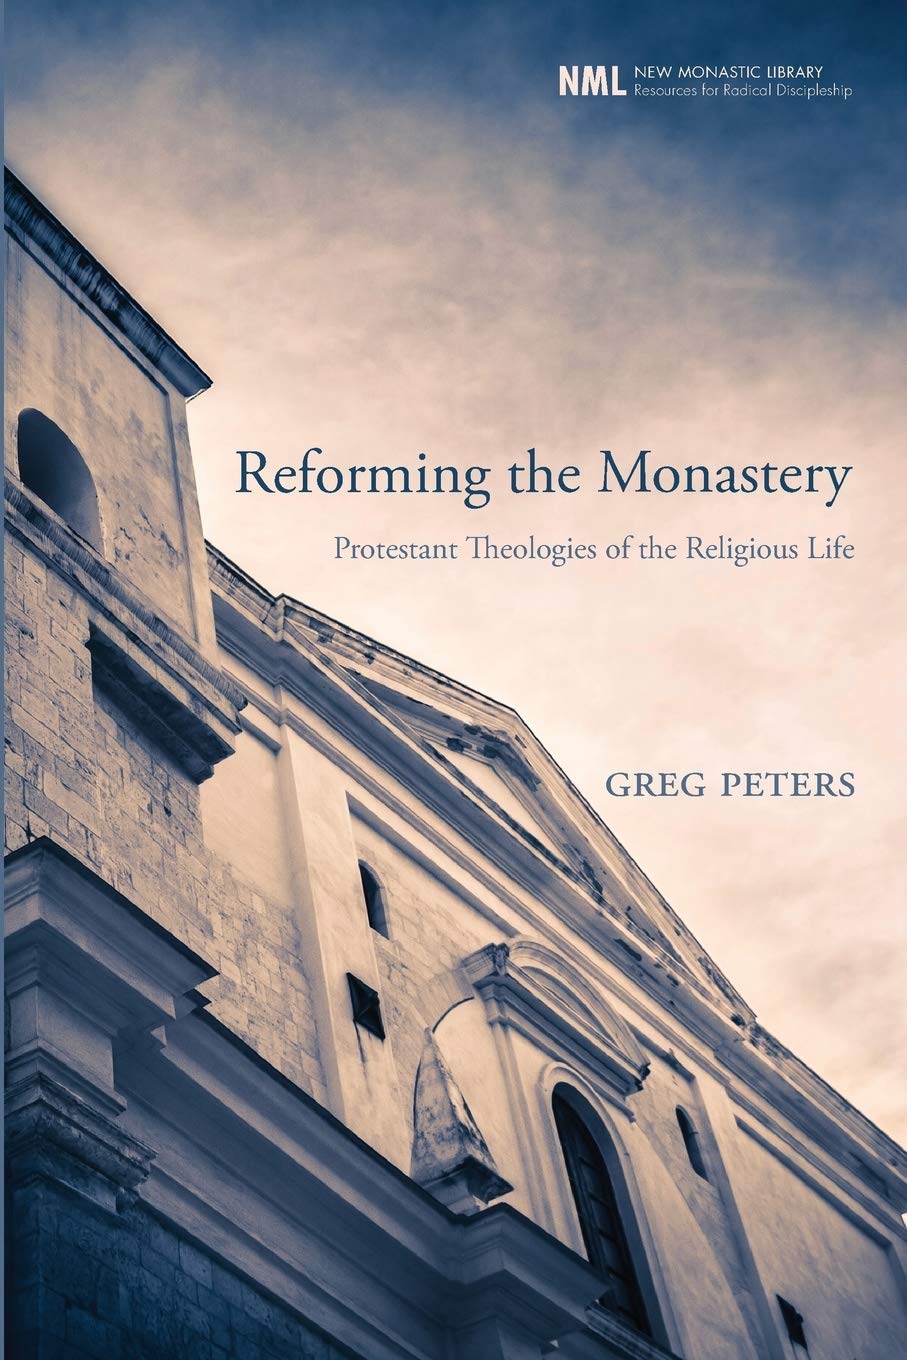 Reforming the Monastery: Protestant Theologies of the Religious Life (New Monastic Library: Resources for Radical Discipleship)